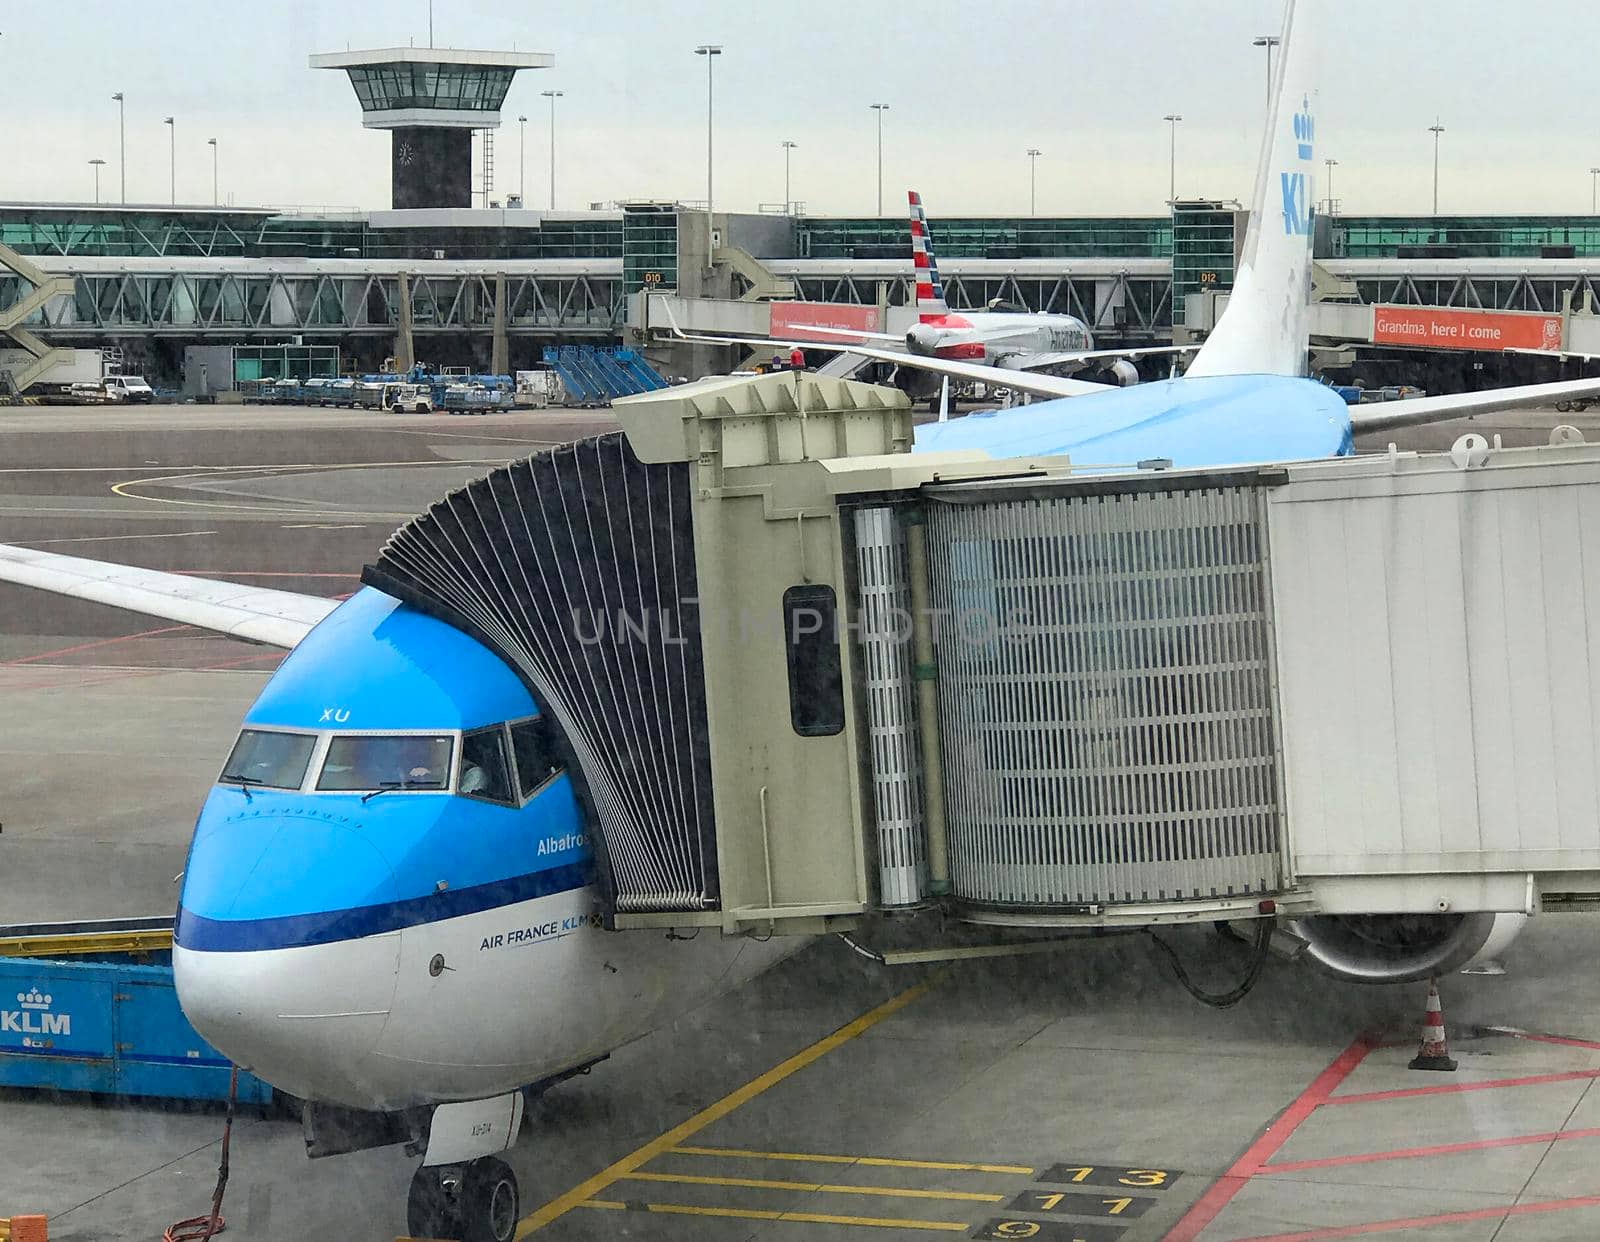 Lisbon, Portugal - March 3, 2017 - Airplane of KLM (Royal Dutch Airlines) got connected to a jet bridge. It's a Boeing 737-800 called Albatross